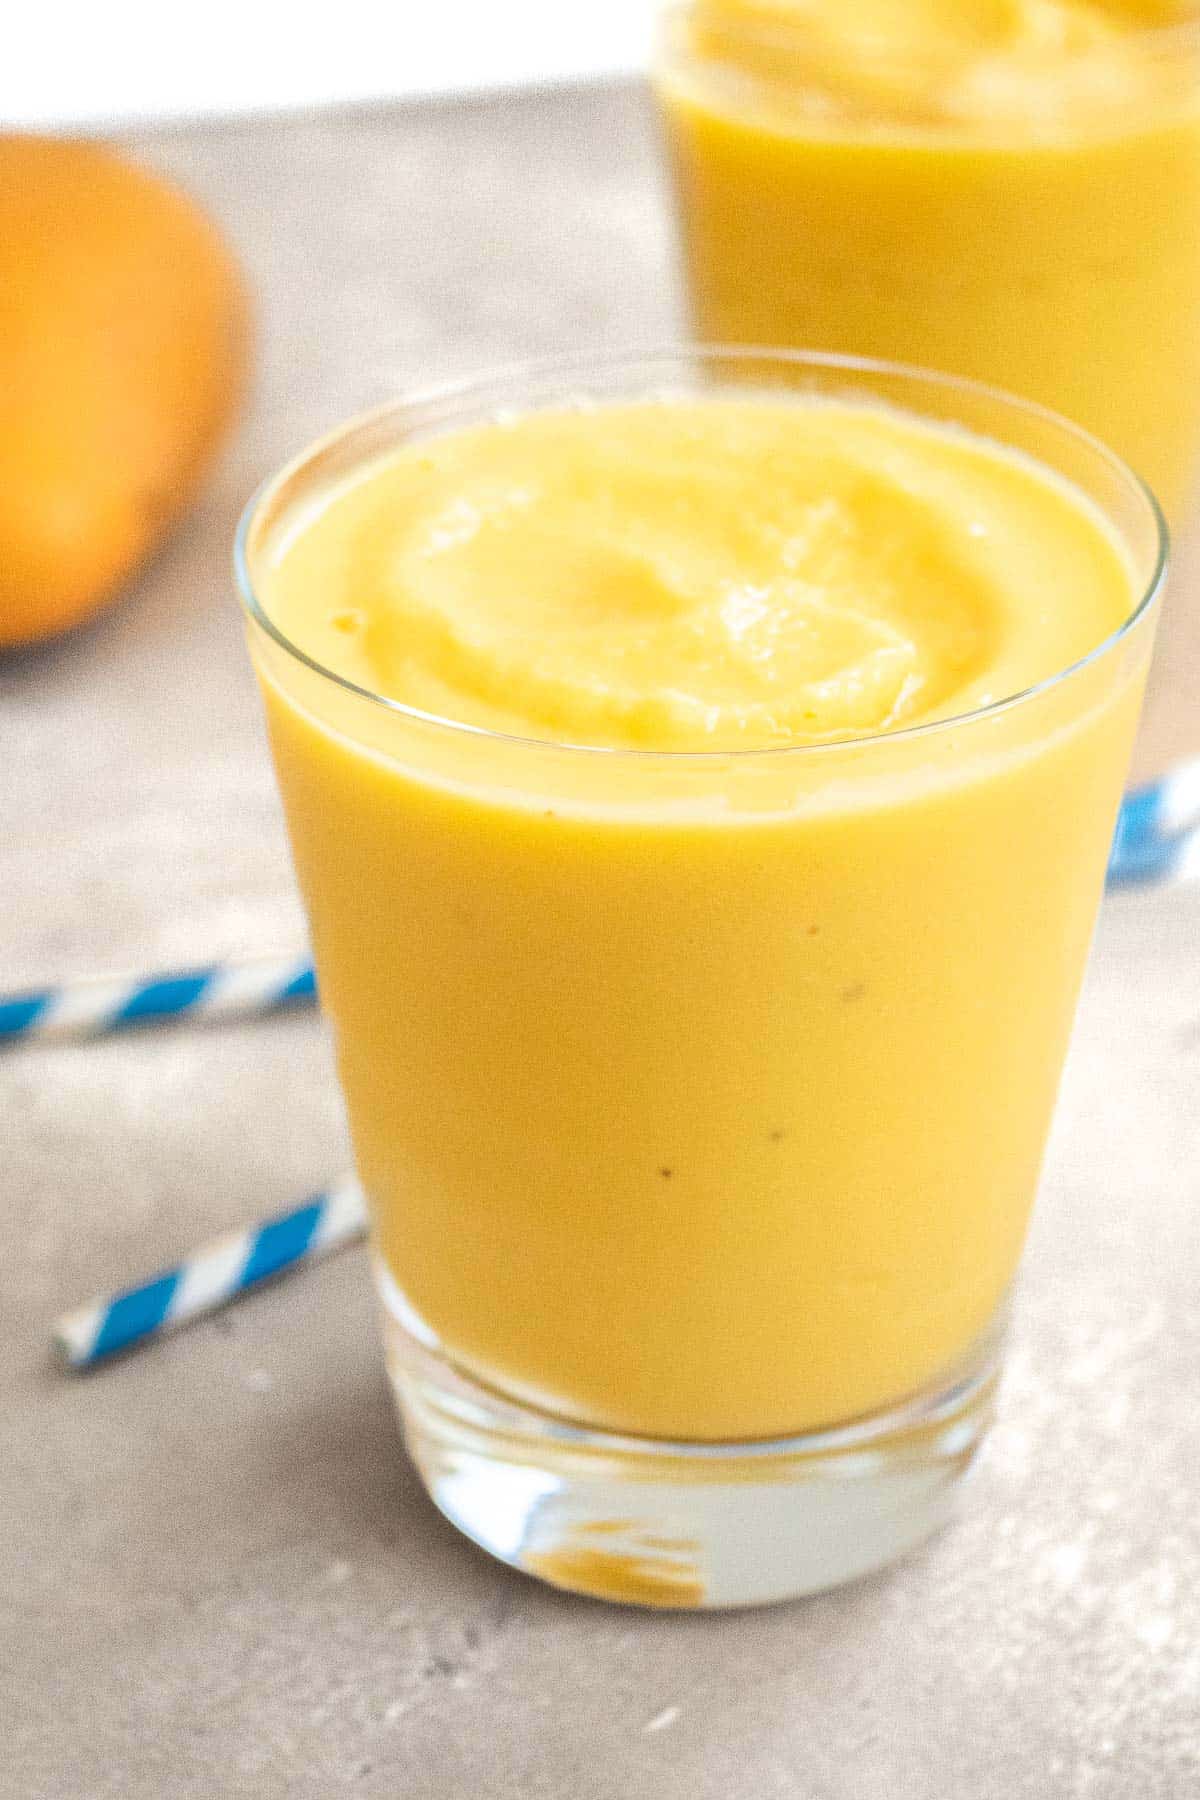 how to prepare mango smoothie at home